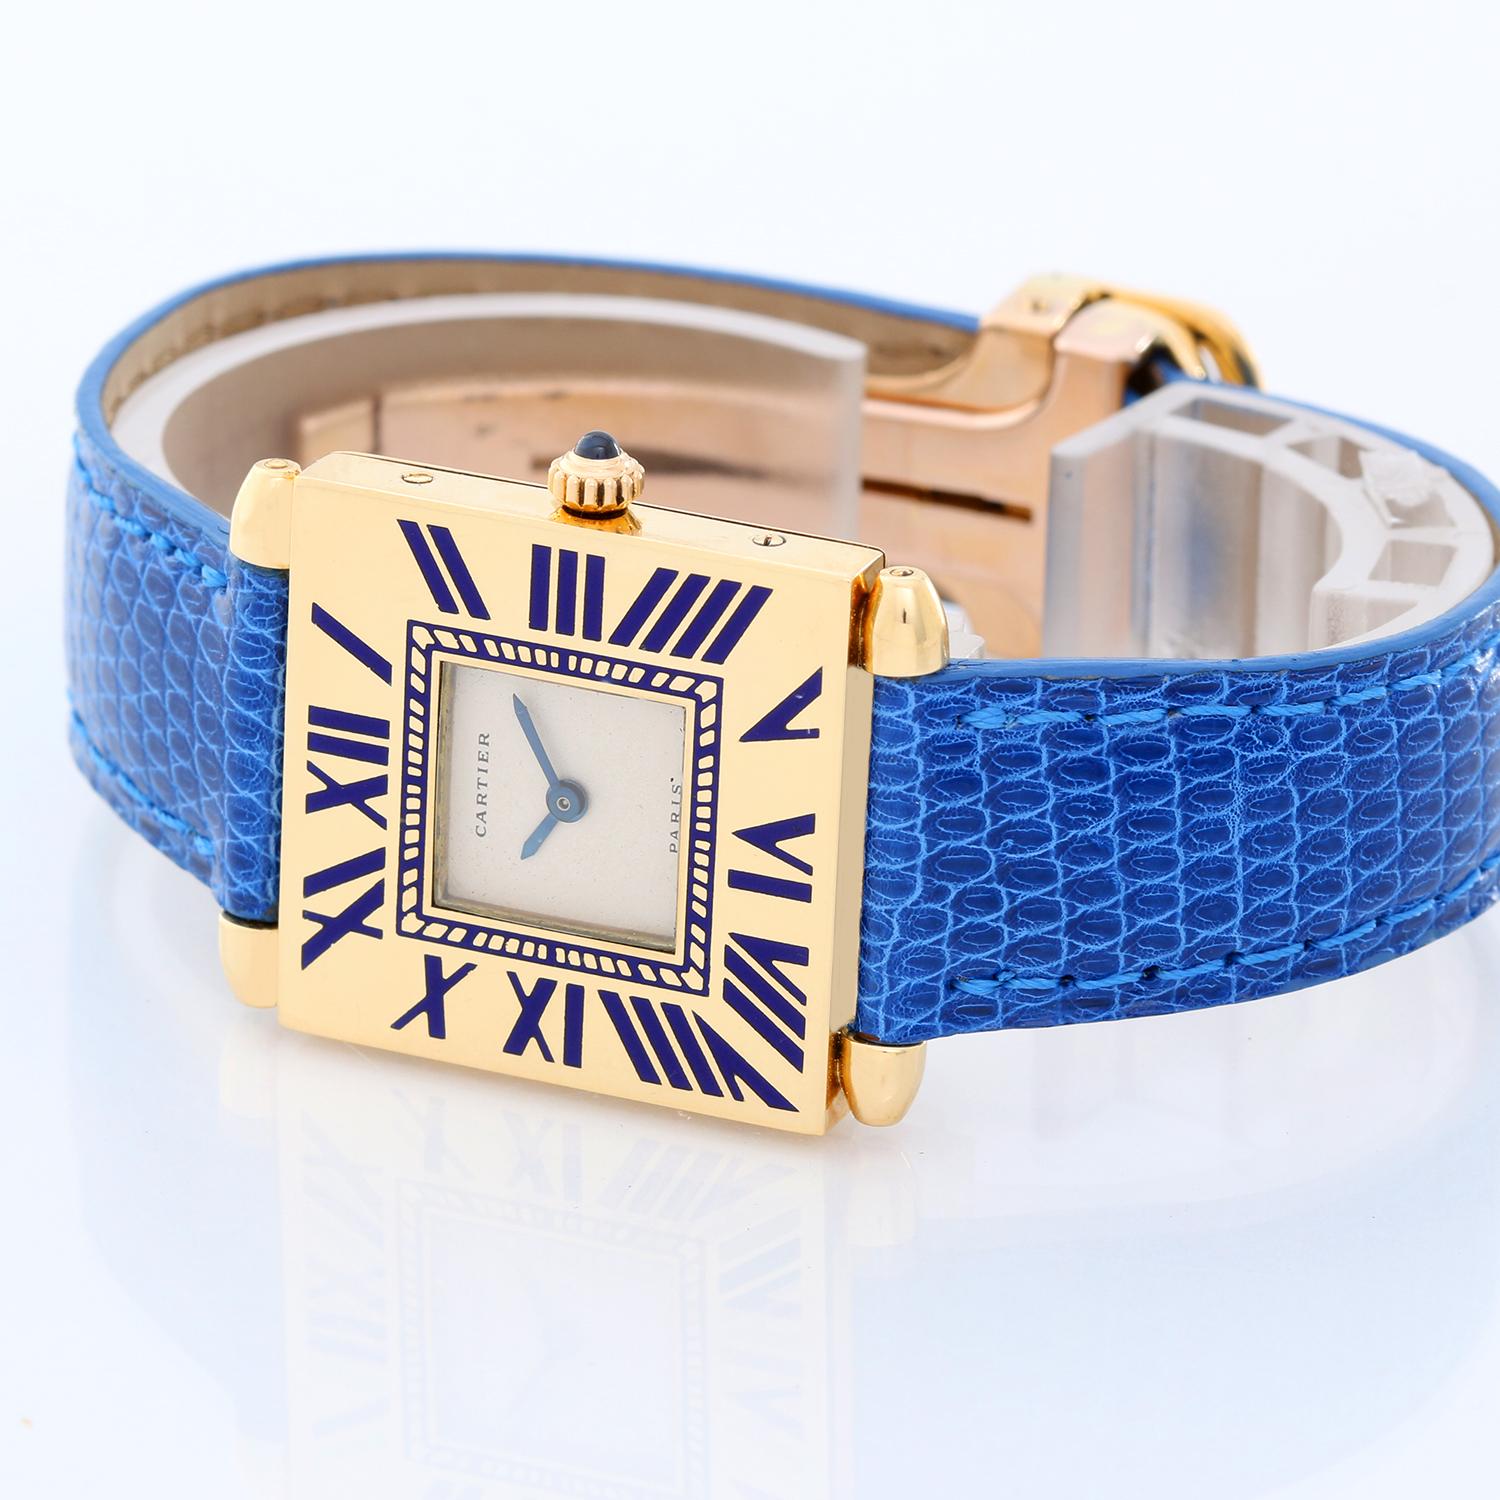 Cartier 18k Yellow Gold Quadrant Ladies Watch - Quartz. 18K Yellow gold ( 25 mm x 32 mm ) grained blue Roman numerals. Ivory dial with blue hands. Blue Cartier leather strap. Pre-owned with custom box.